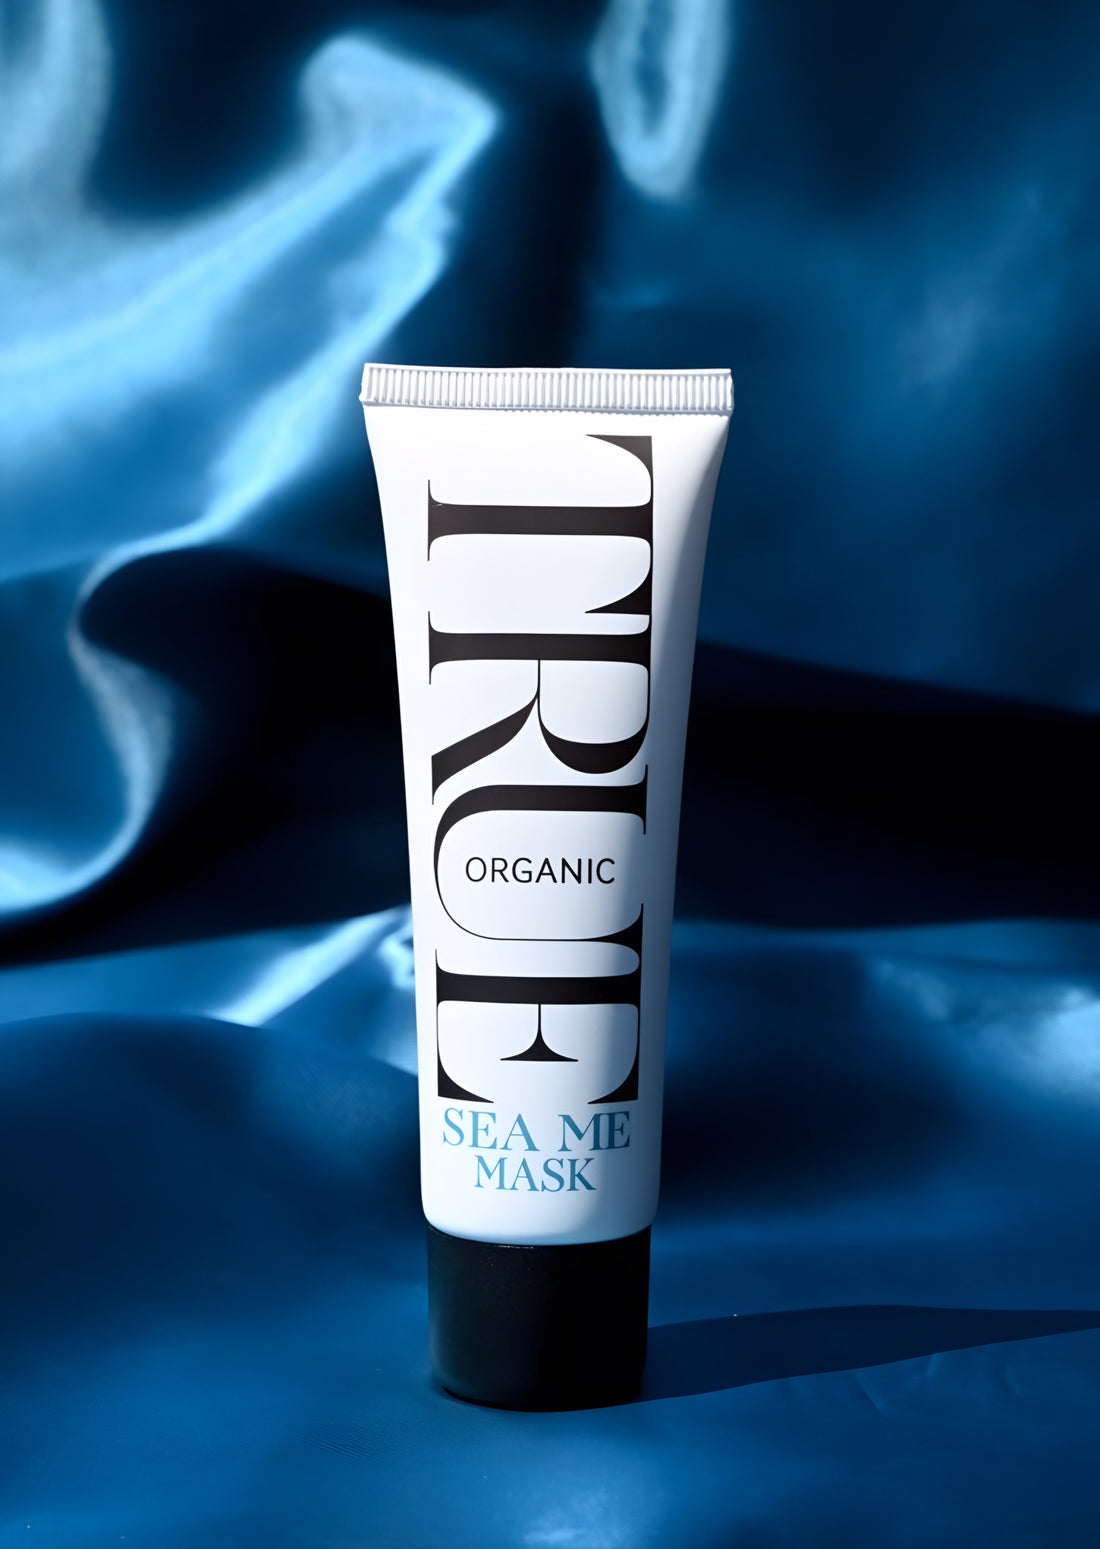 Sea me mask by True organic of Sweden for glowing skin 